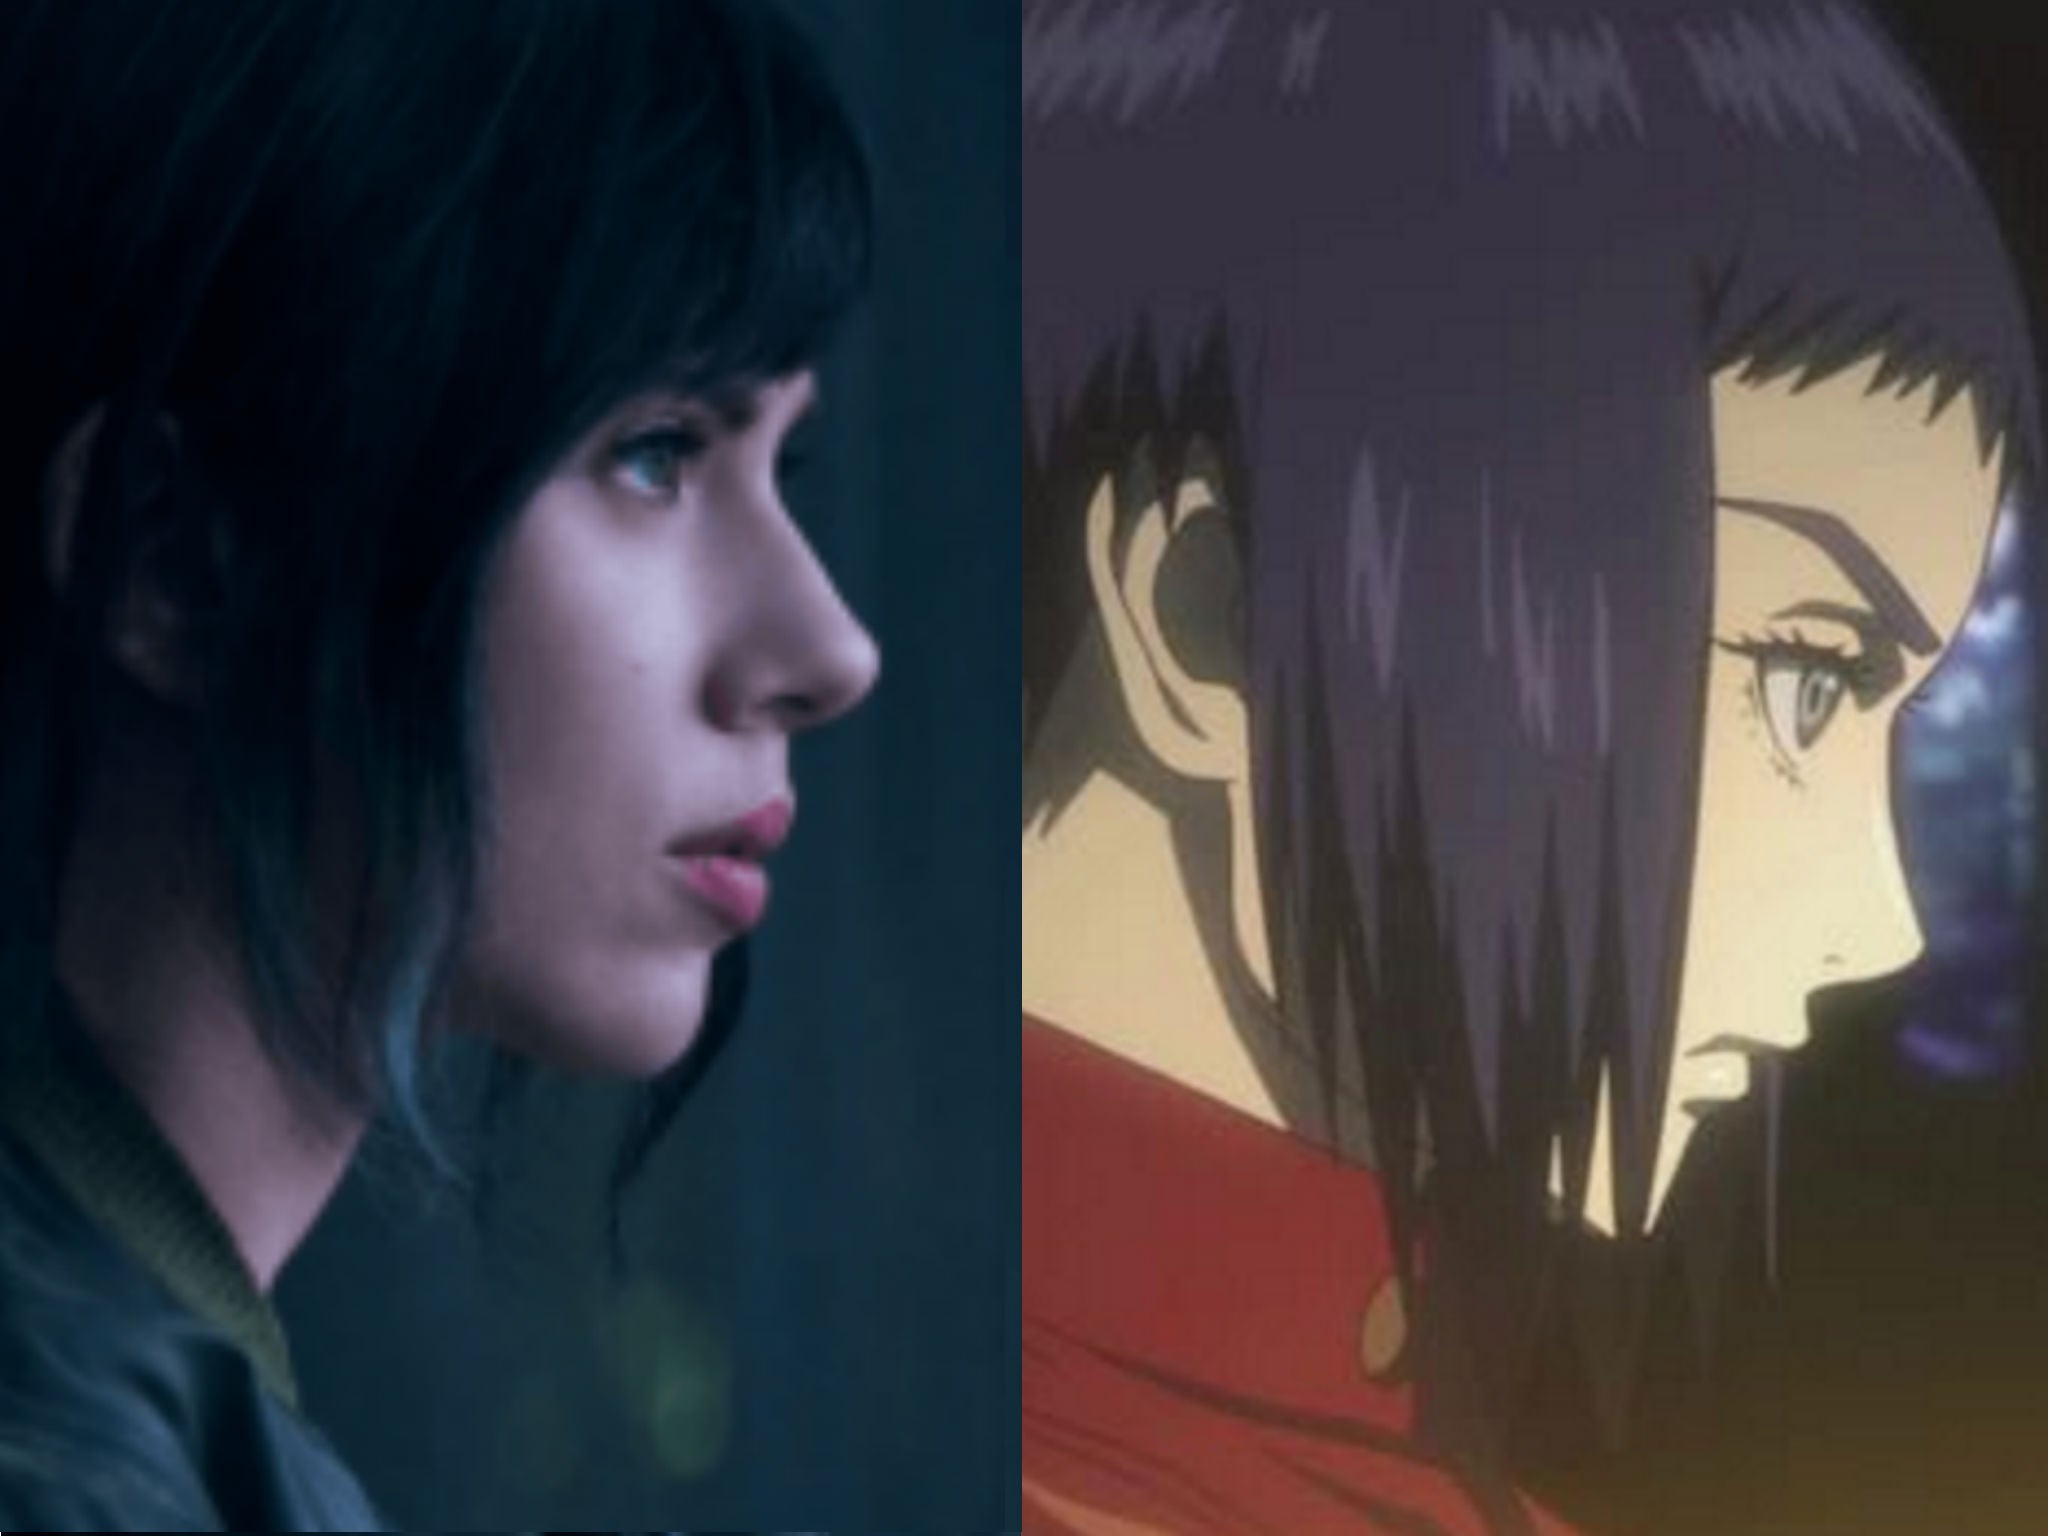 Ghost in the Shell image of Scarlett Johansson incites backlash against  'whitewashing' | The Independent | The Independent